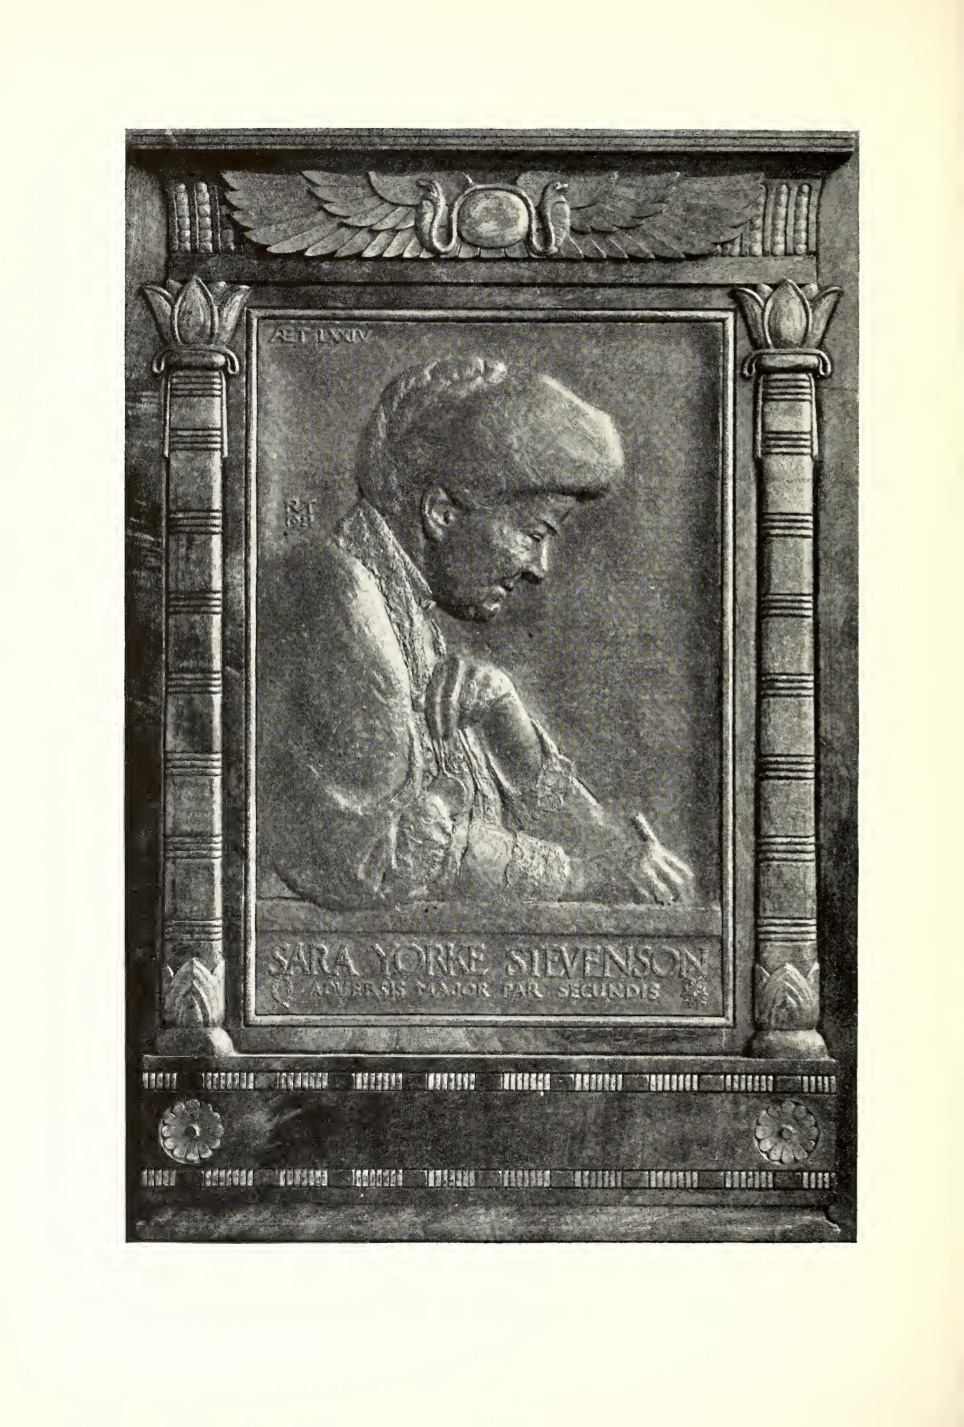 black and white image of bas-relief portrait